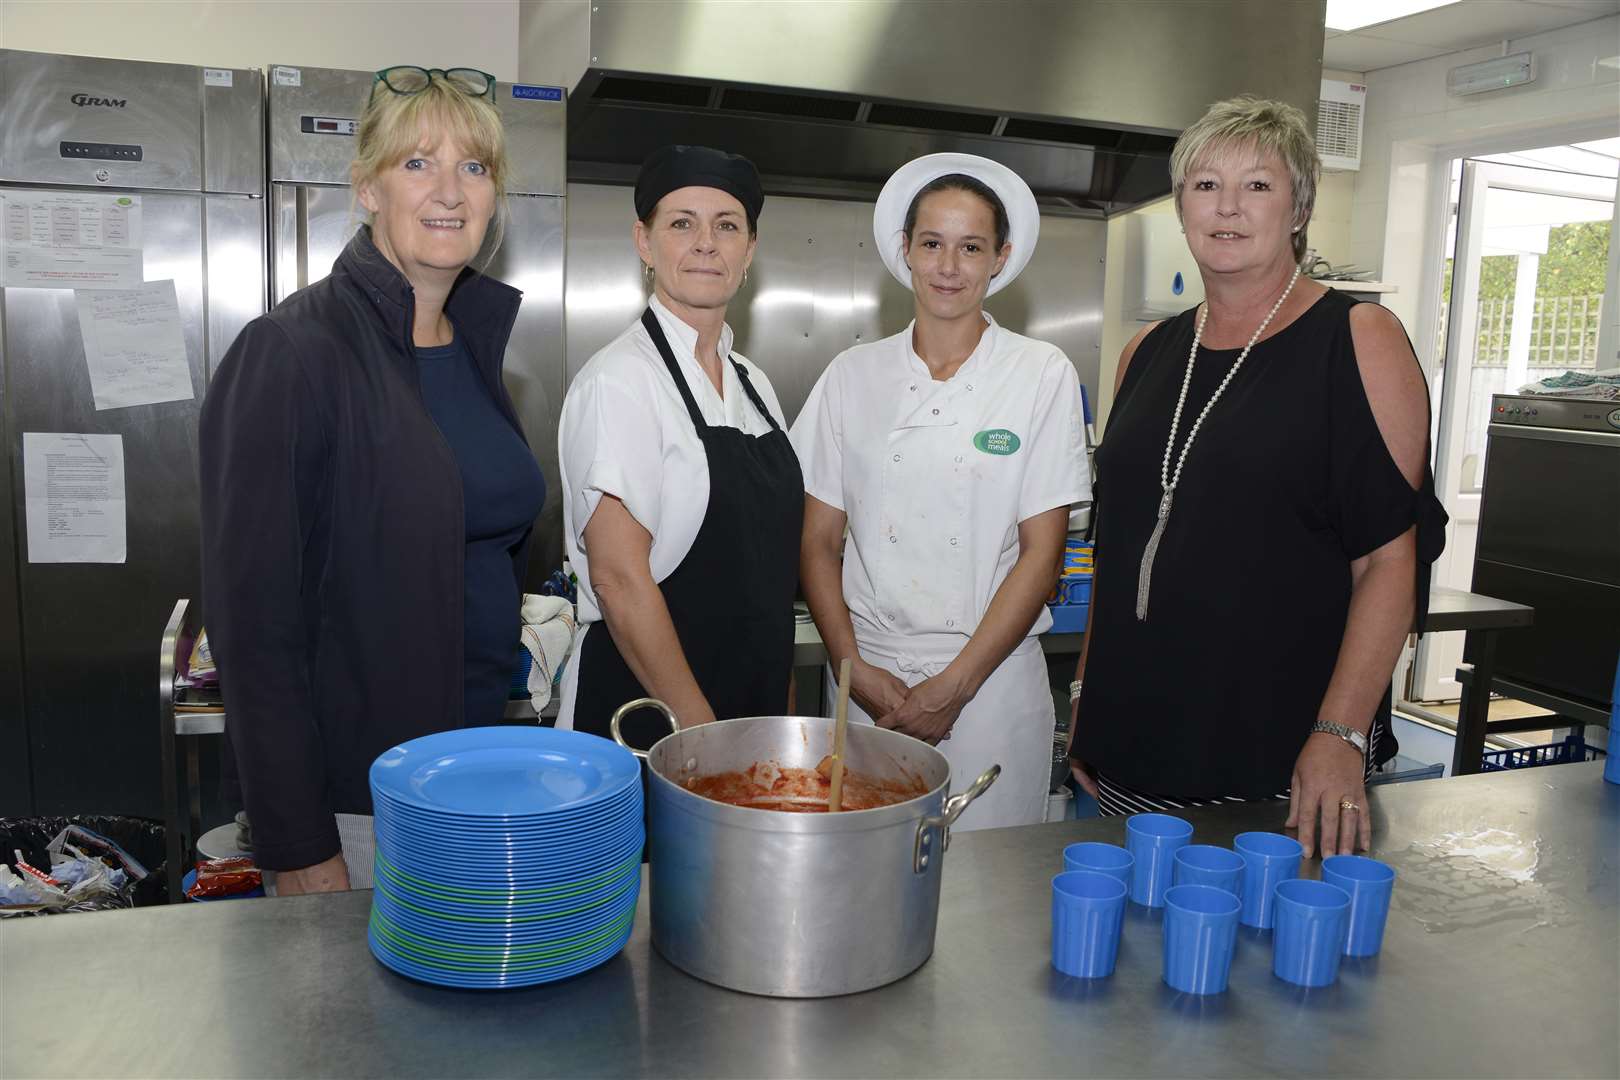 Whole School Meals celebrate 10 years of serving school dinners,from left chairman Stephanie Hayman, kitchen assistant Justine Stevens, acting cook Vikki Boyce and chief executive Julia Hallett.